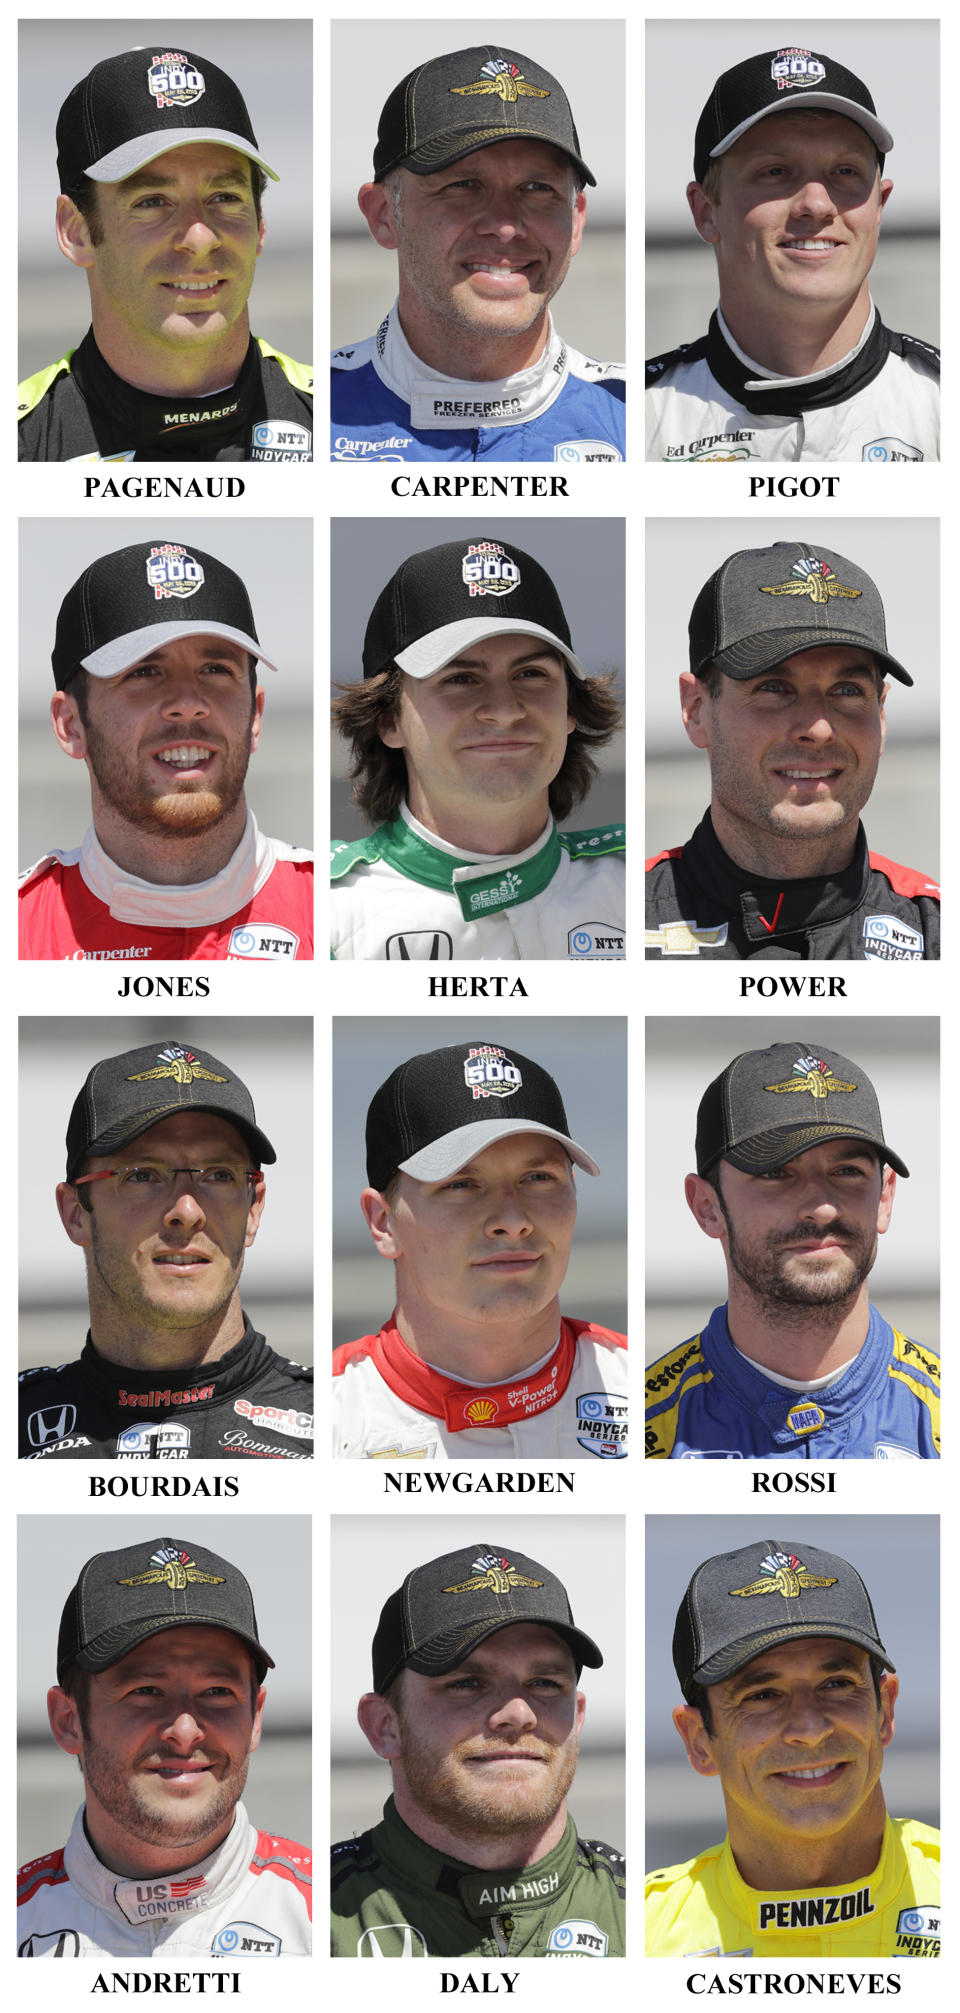 Drivers in the starting field for the May 26 Indianapolis 500 IndyCar auto race are shown after they qualified at the Indianapolis Motor Speedway in Indianapolis, Saturday, May 18, 2019. First row: Simon Pagenaud, of France, Ed Carpenter and Spencer Pigot. Second row: Ed Jones, of United Arab Emirates, Colton Herta and Will Power, of Australia. Third row: Sebastien Bourdais, of France, Josef Newgarden and Alexander Rossi. Fourth row: Marco Andretti, Conor Daly and Helio Castroneves, of Brazil. (AP Photo/Dave Parker)